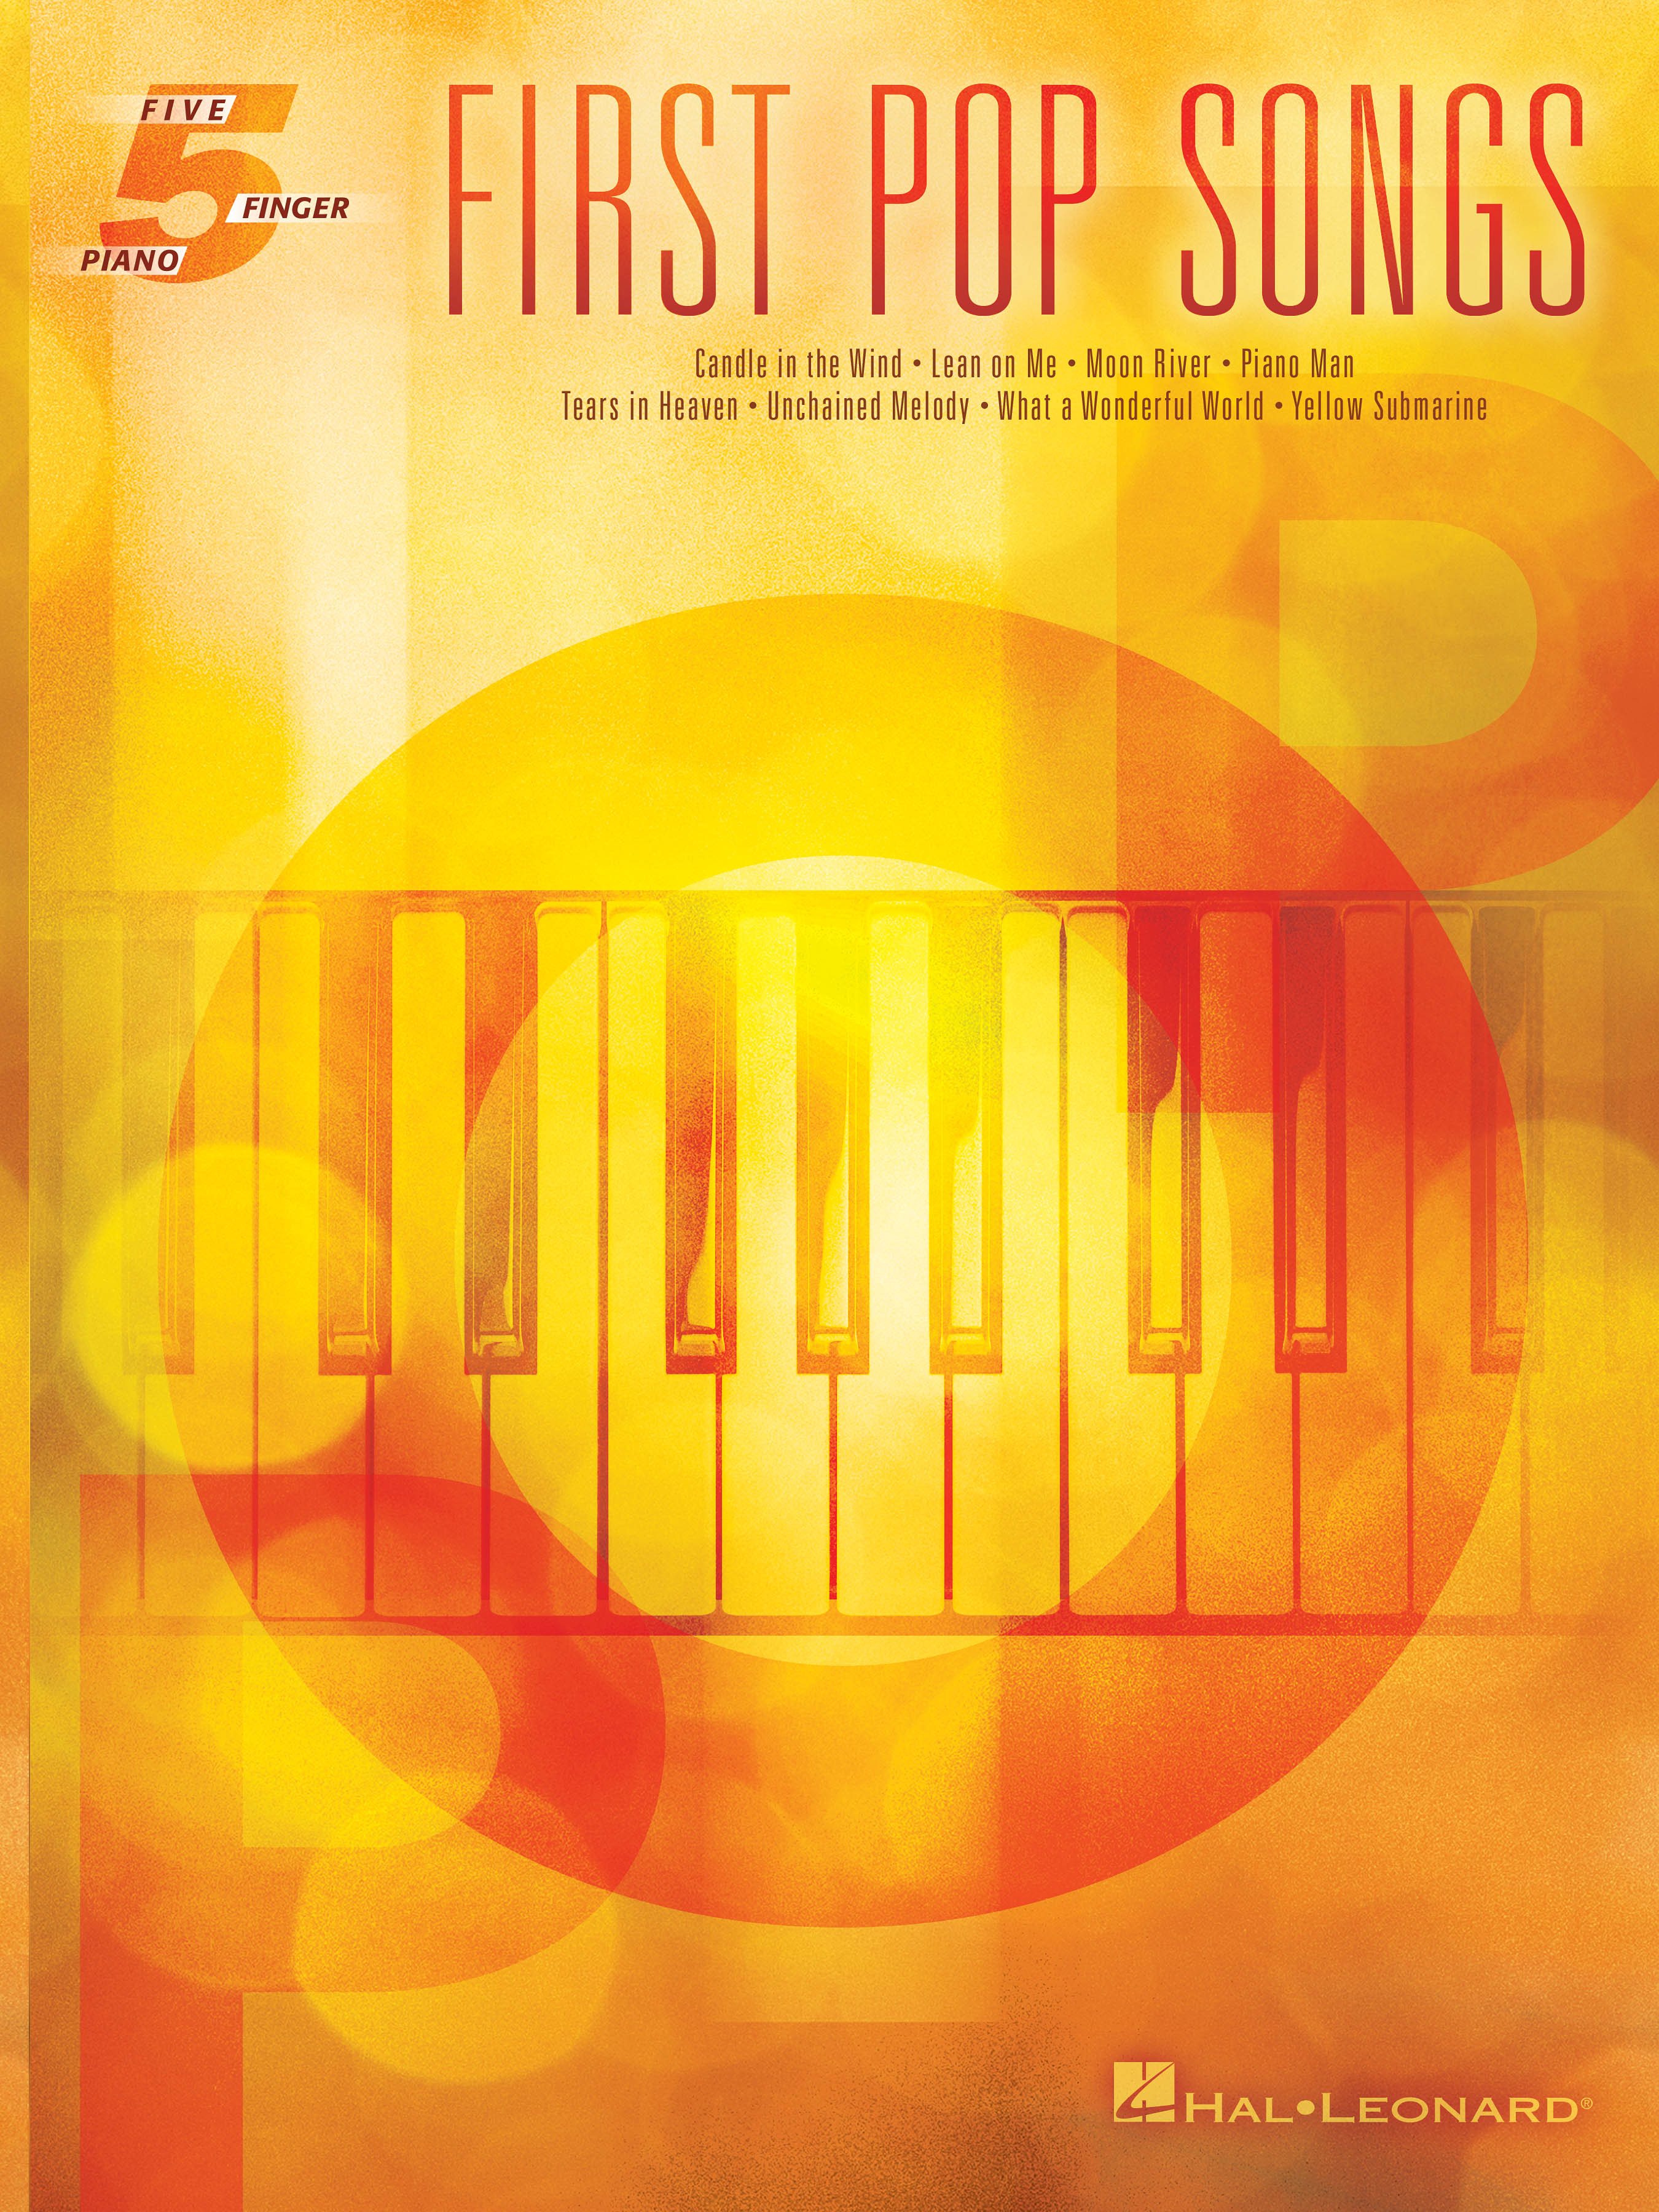 First Pop Songs - Five Finger Piano Songbook